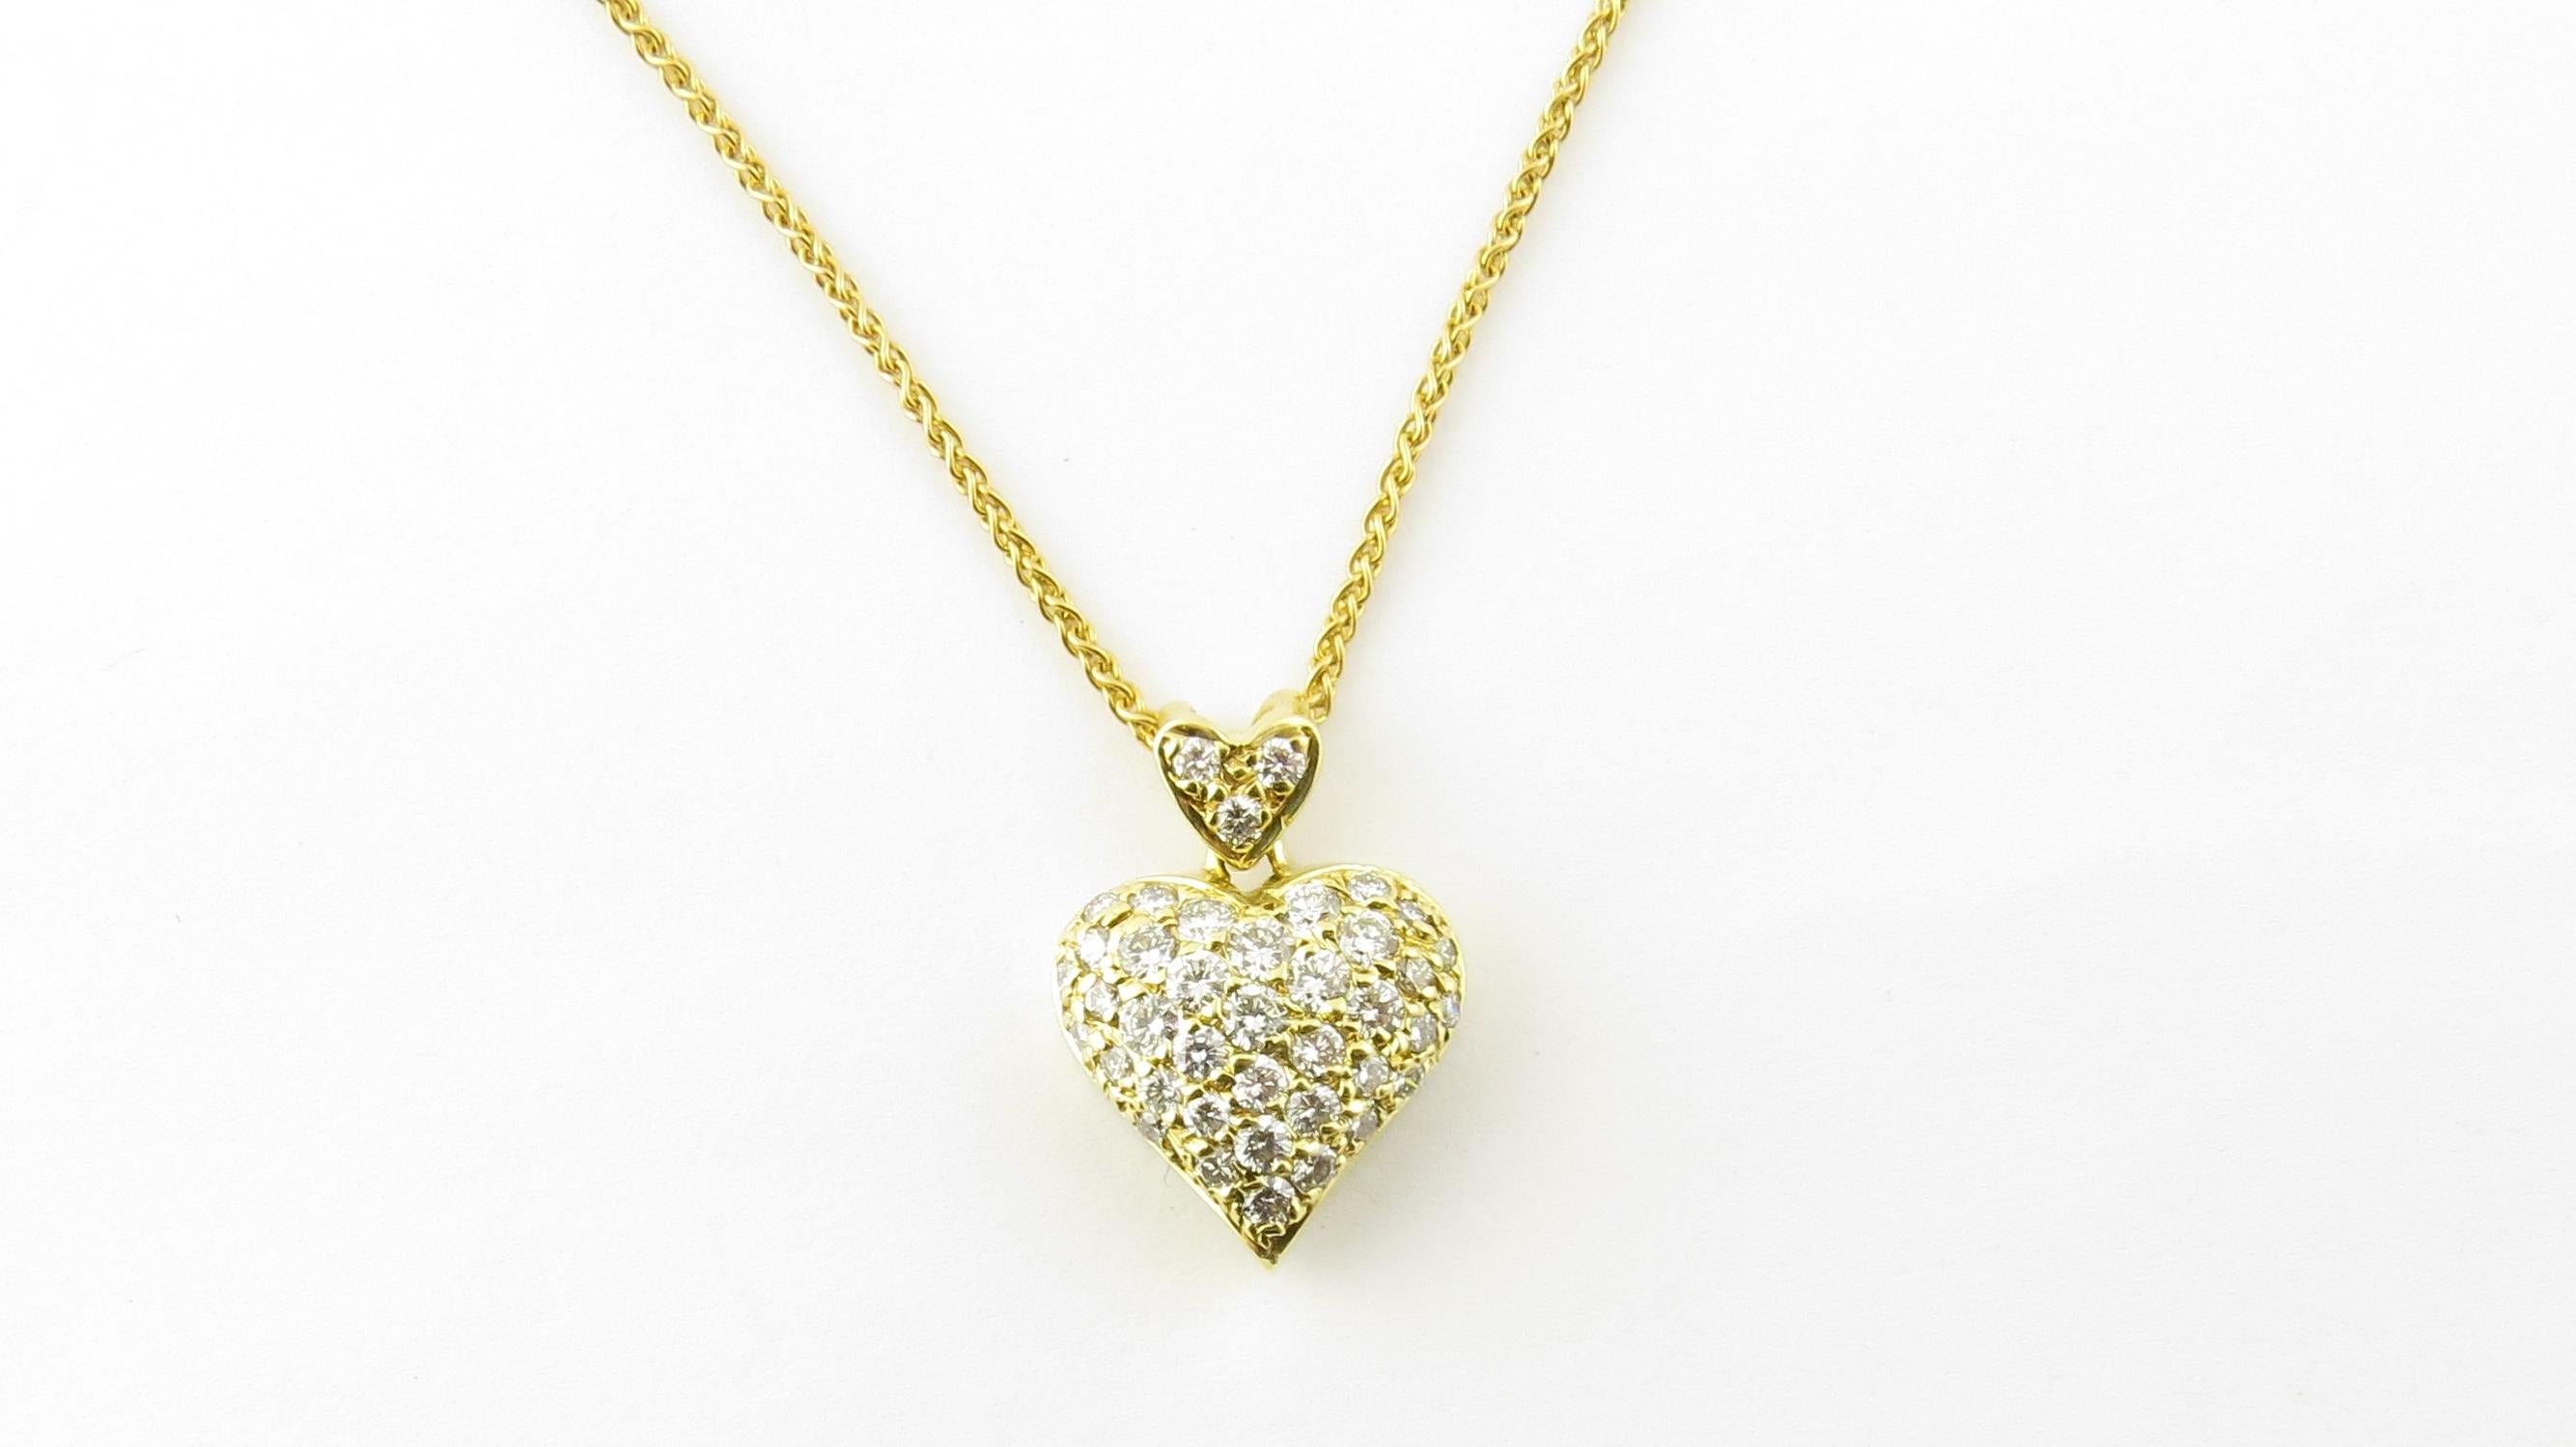 Vintage 18 Karat Yellow Gold Diamond Heart Pendant Necklace

This romantic double heart pendant features 40 round brilliant cut diamonds set in classic 18K yellow gold. Suspended from an elegant 16